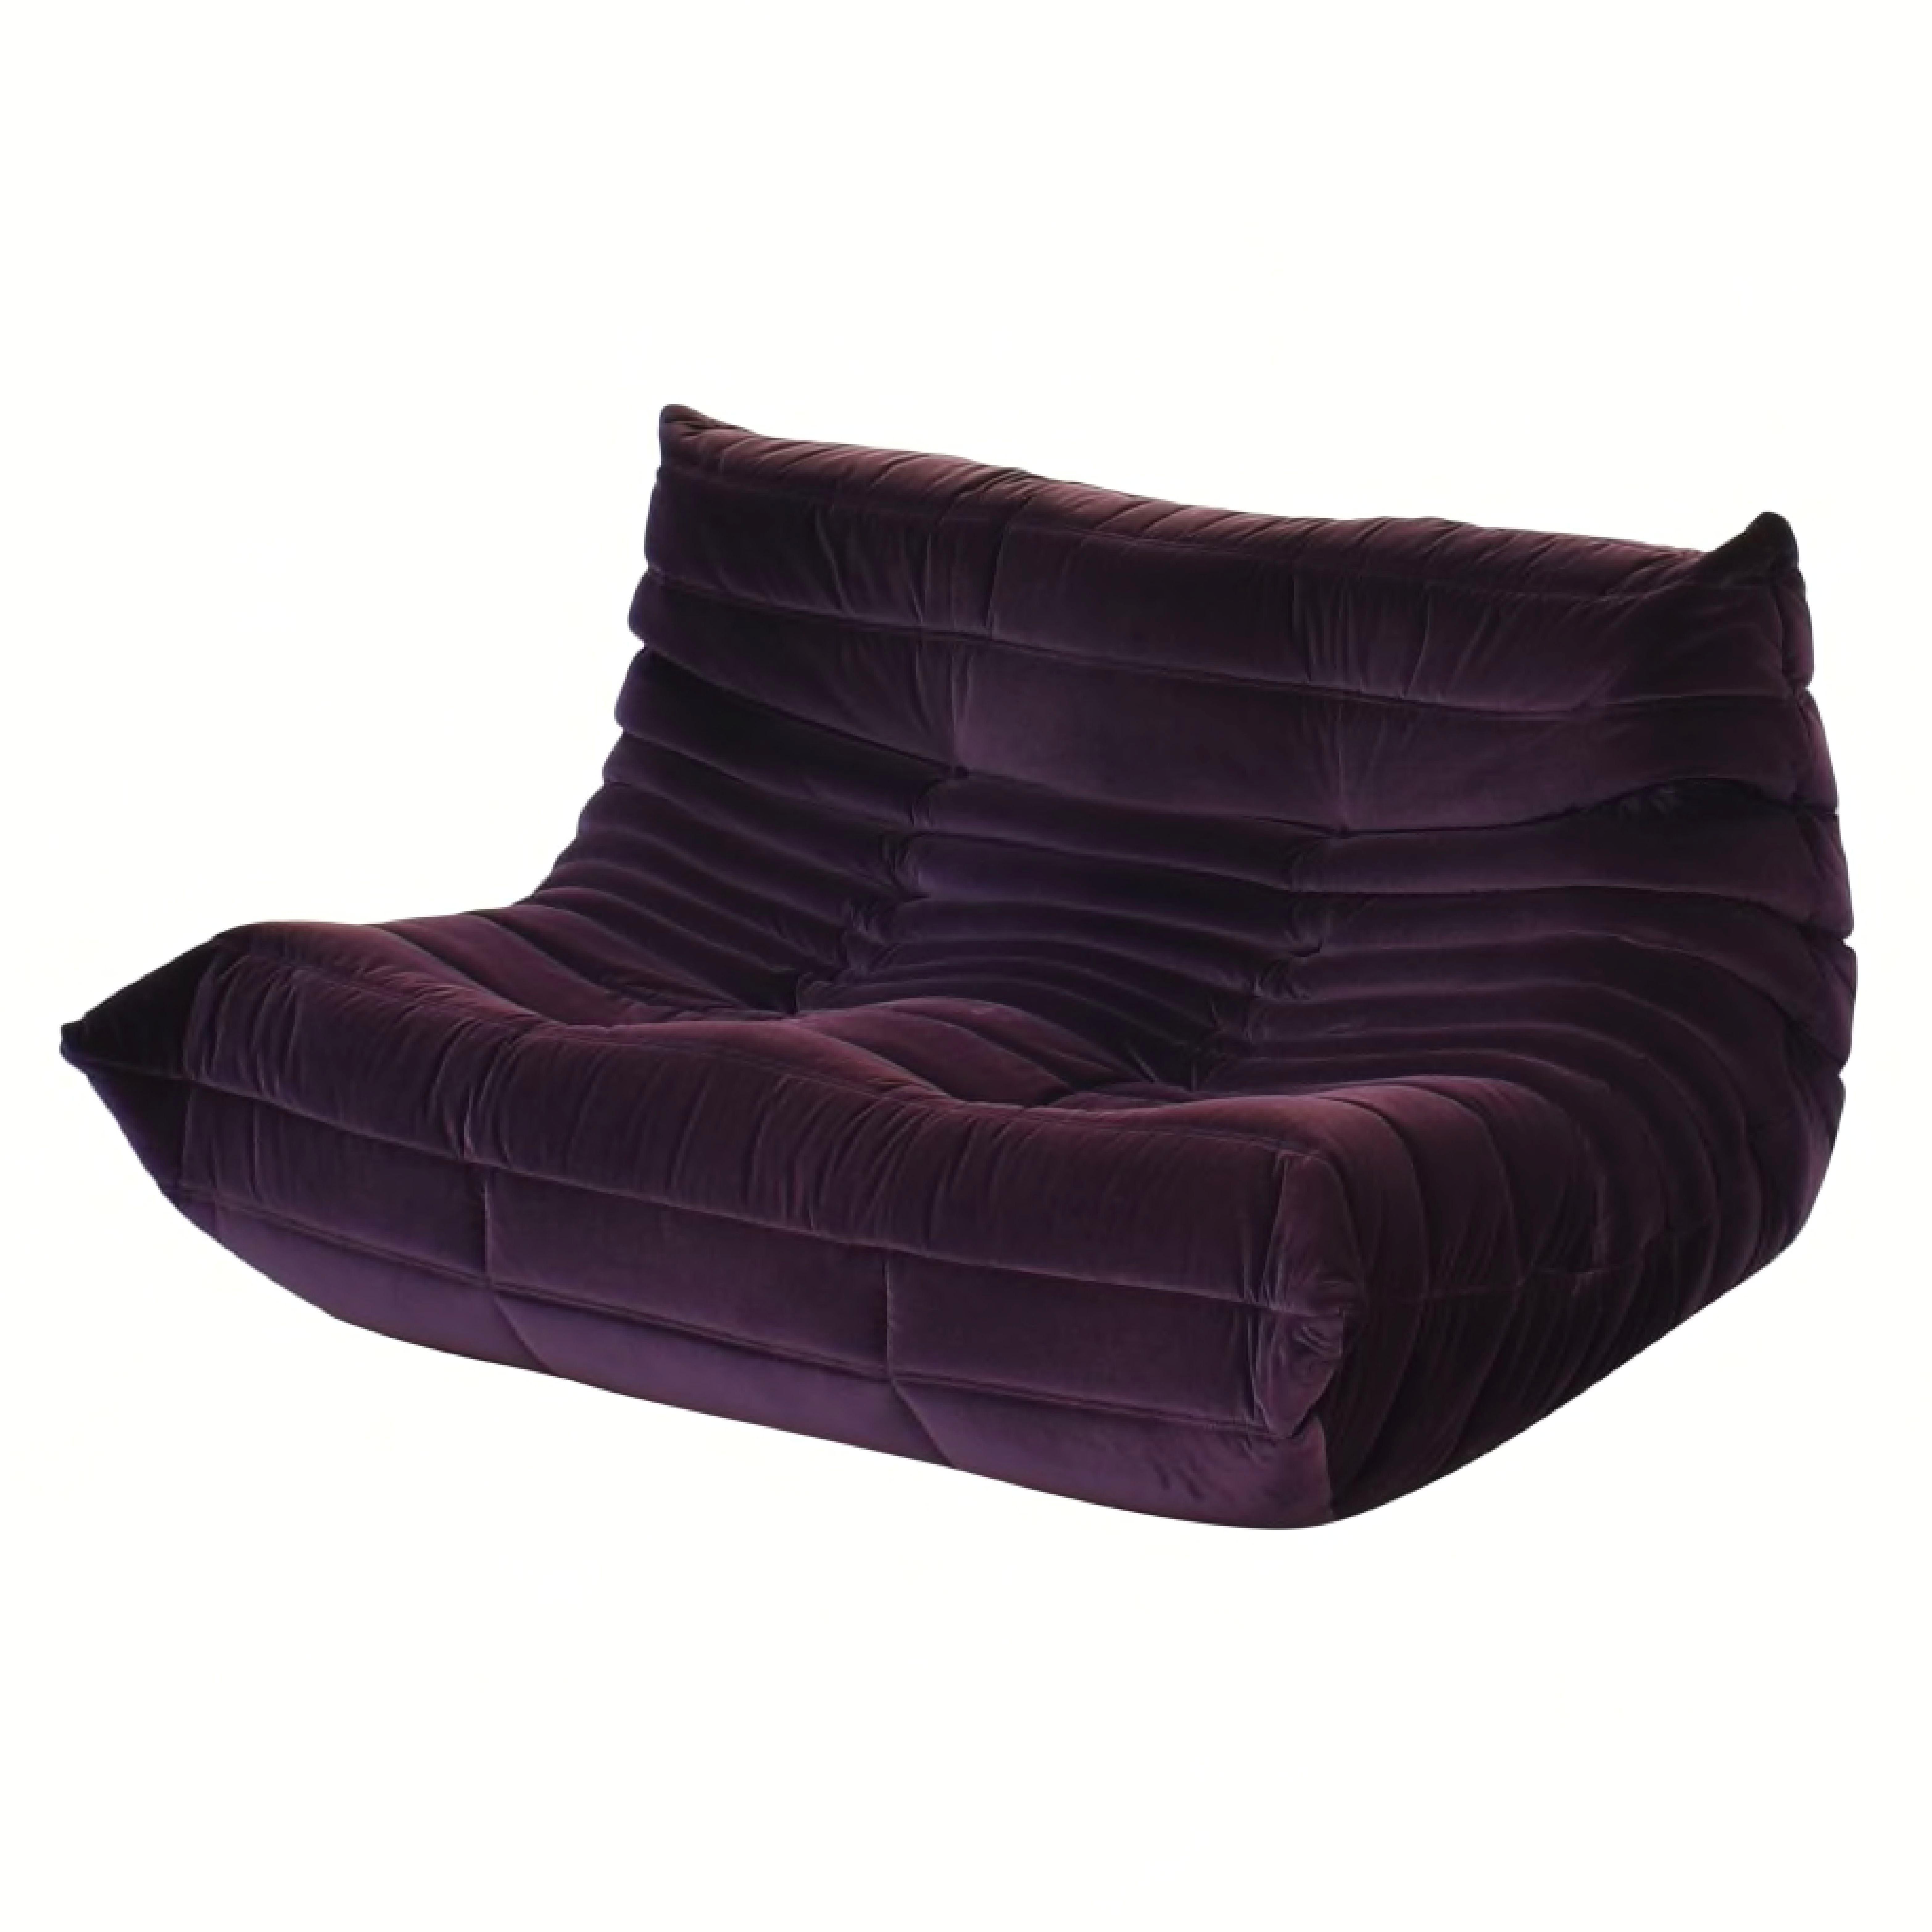 Michel Ducaroy for Ligne Roset Togo Loveseat Sofa, Herald Cassis Purple Velvet. Characteristics
A Ligne Roset classic, Michel Ducaroy's Togo has been the ultimate in comfort and style for over forty years. The timeless collection features an